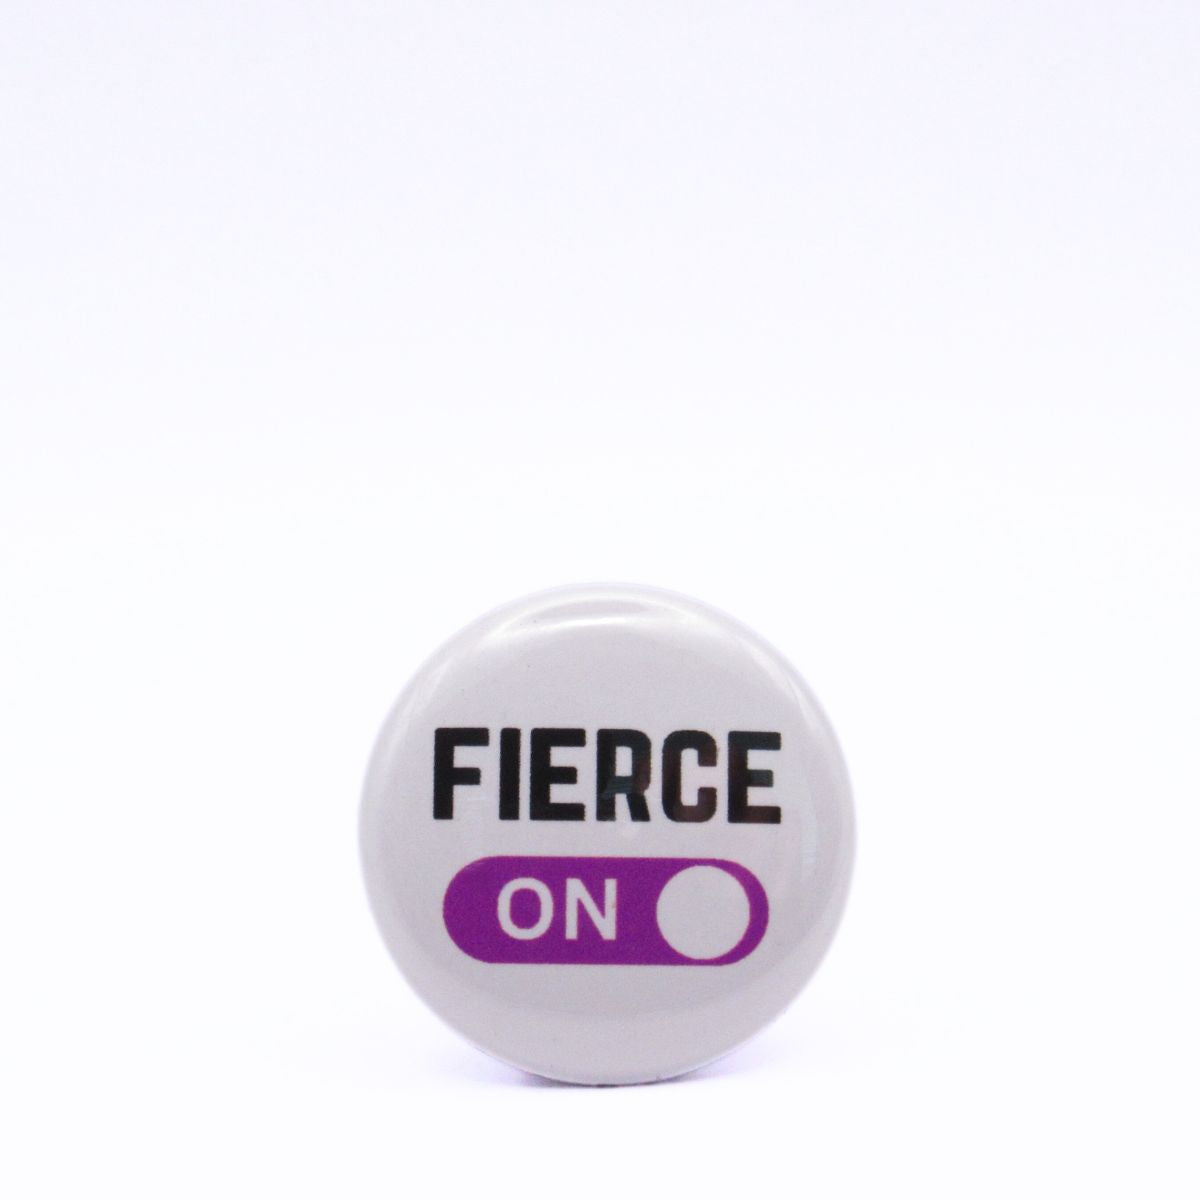 BooBooRoo Pinback Button (i.e. button, badge, pin) displaying fierce mode is on. Purple background for mode indicator.